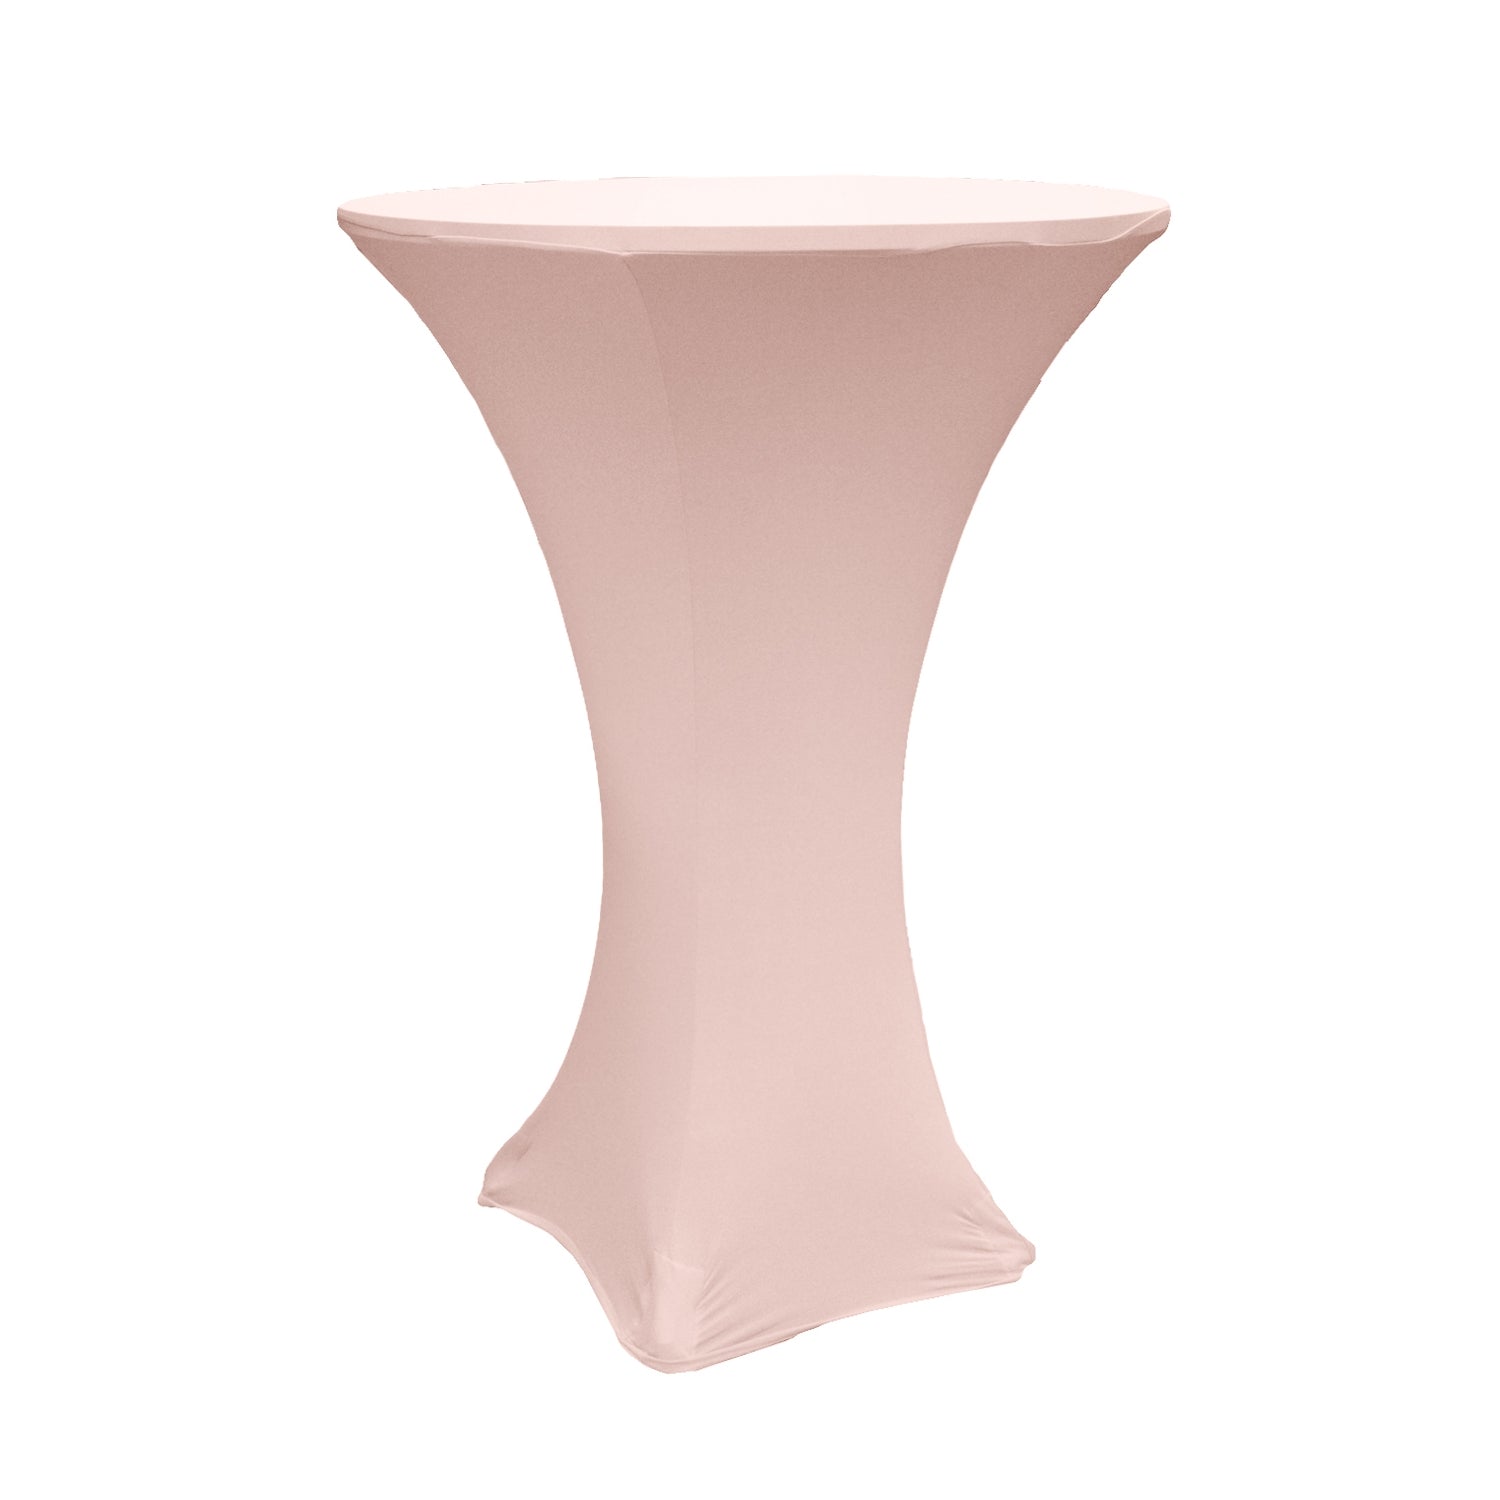 Spandex Cocktail Table Cover 30" Round - Blush/Rose Gold - CV Linens